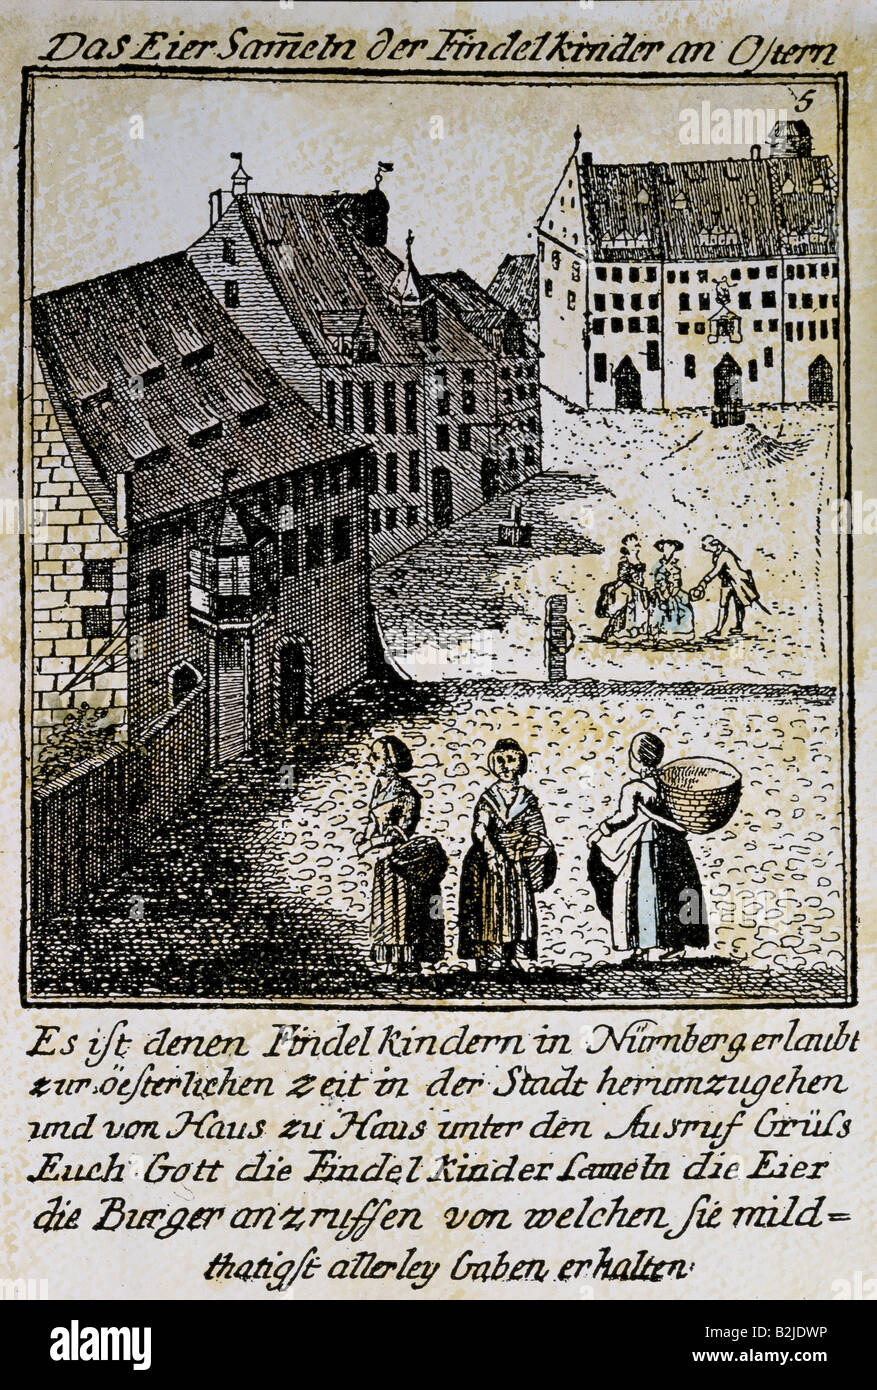 festivity, Easter, orphans collecting eggs in Nuremberg, copper engraving, mid 18th century, private collection, Germany, Bavaria, Franconia, children, custom, people, historic, historical, Stock Photo